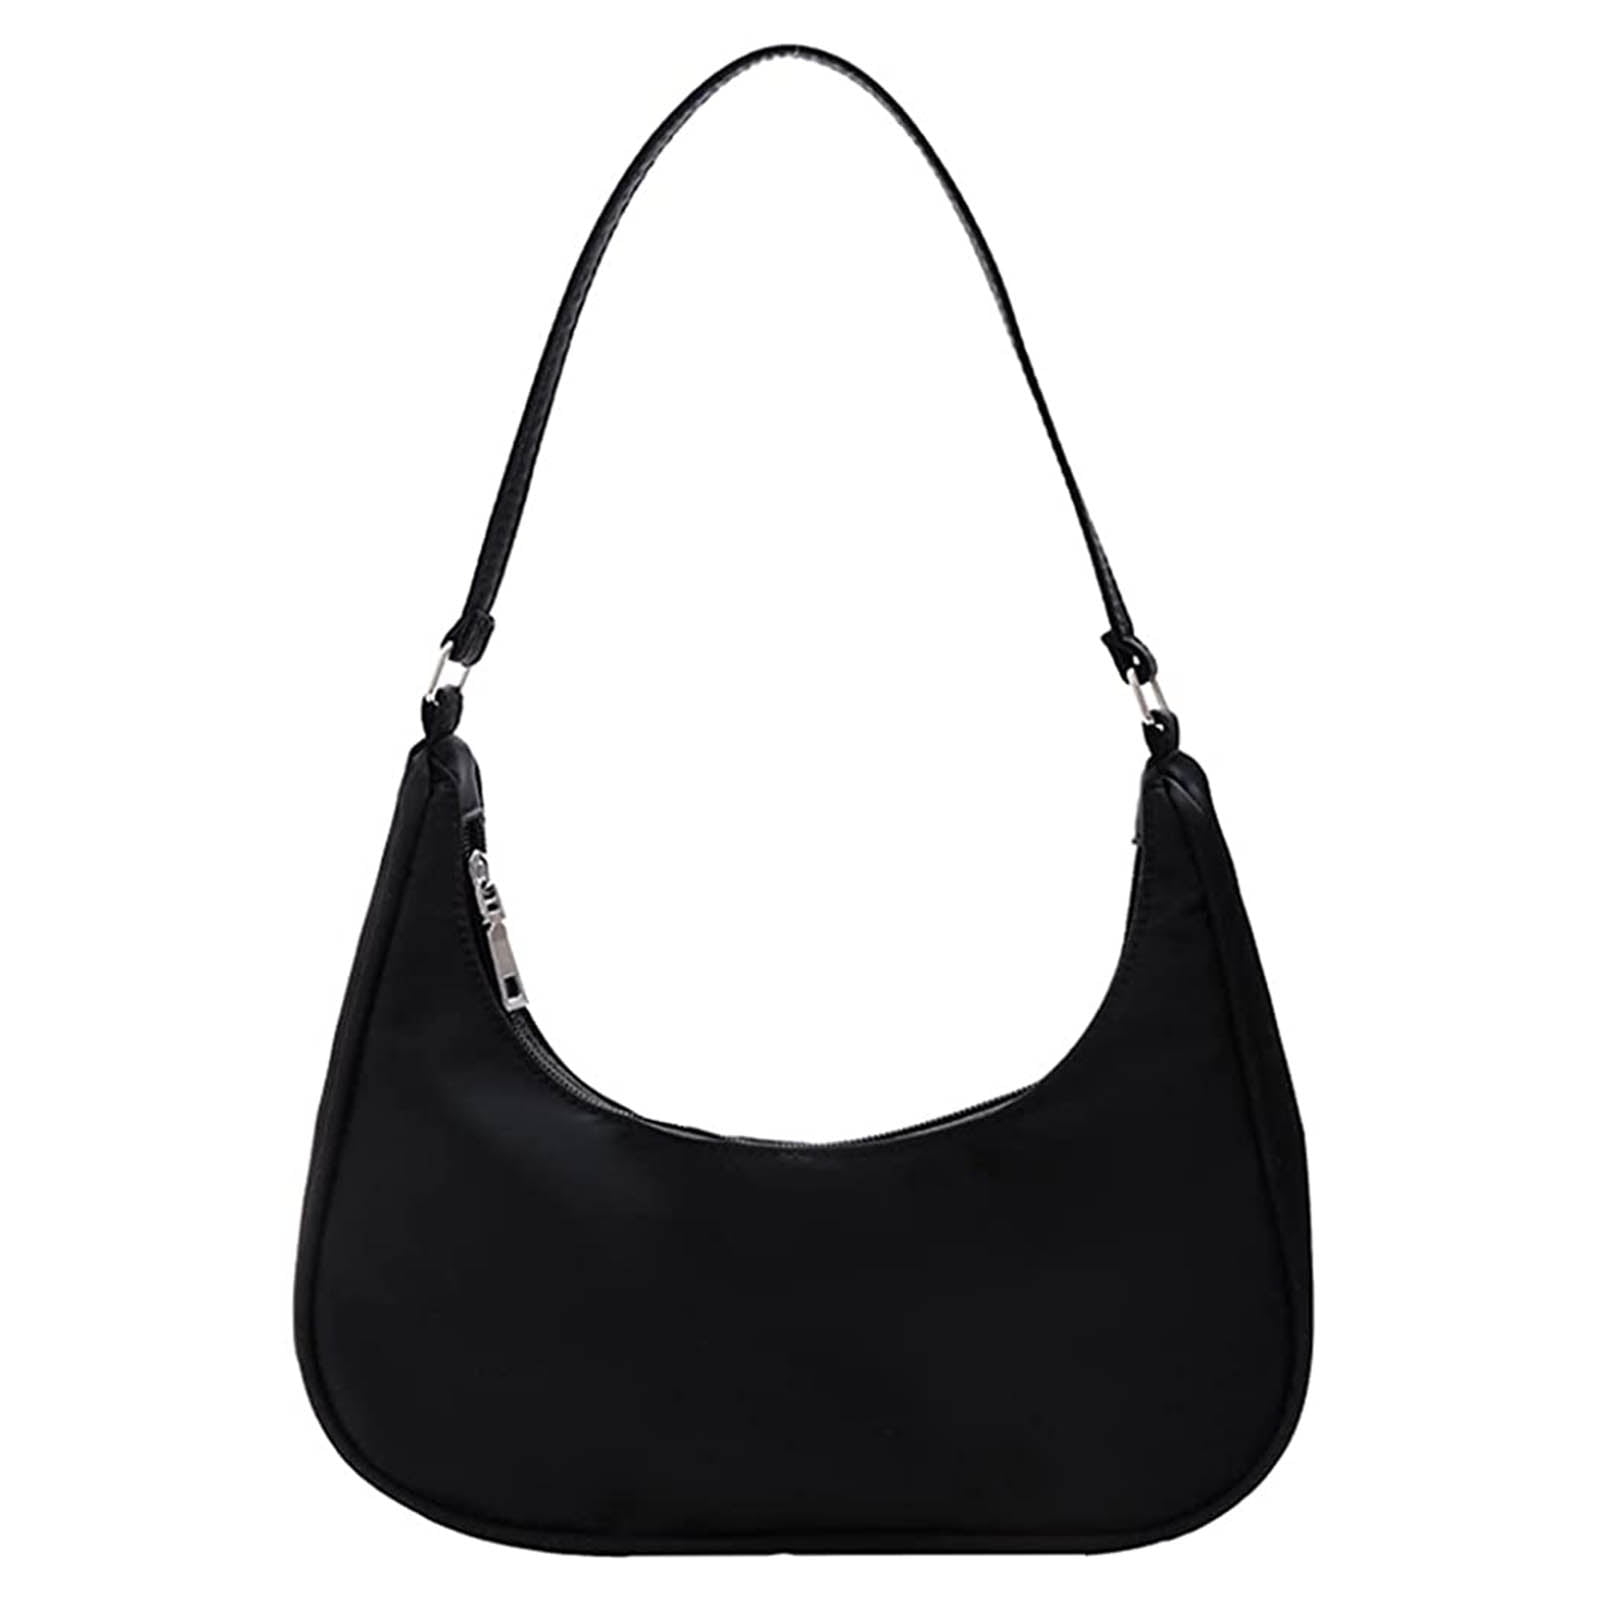 As Per Availability Ladies Black Leather Hand Bag at Best Price in Kolkata  | Zen Nanational